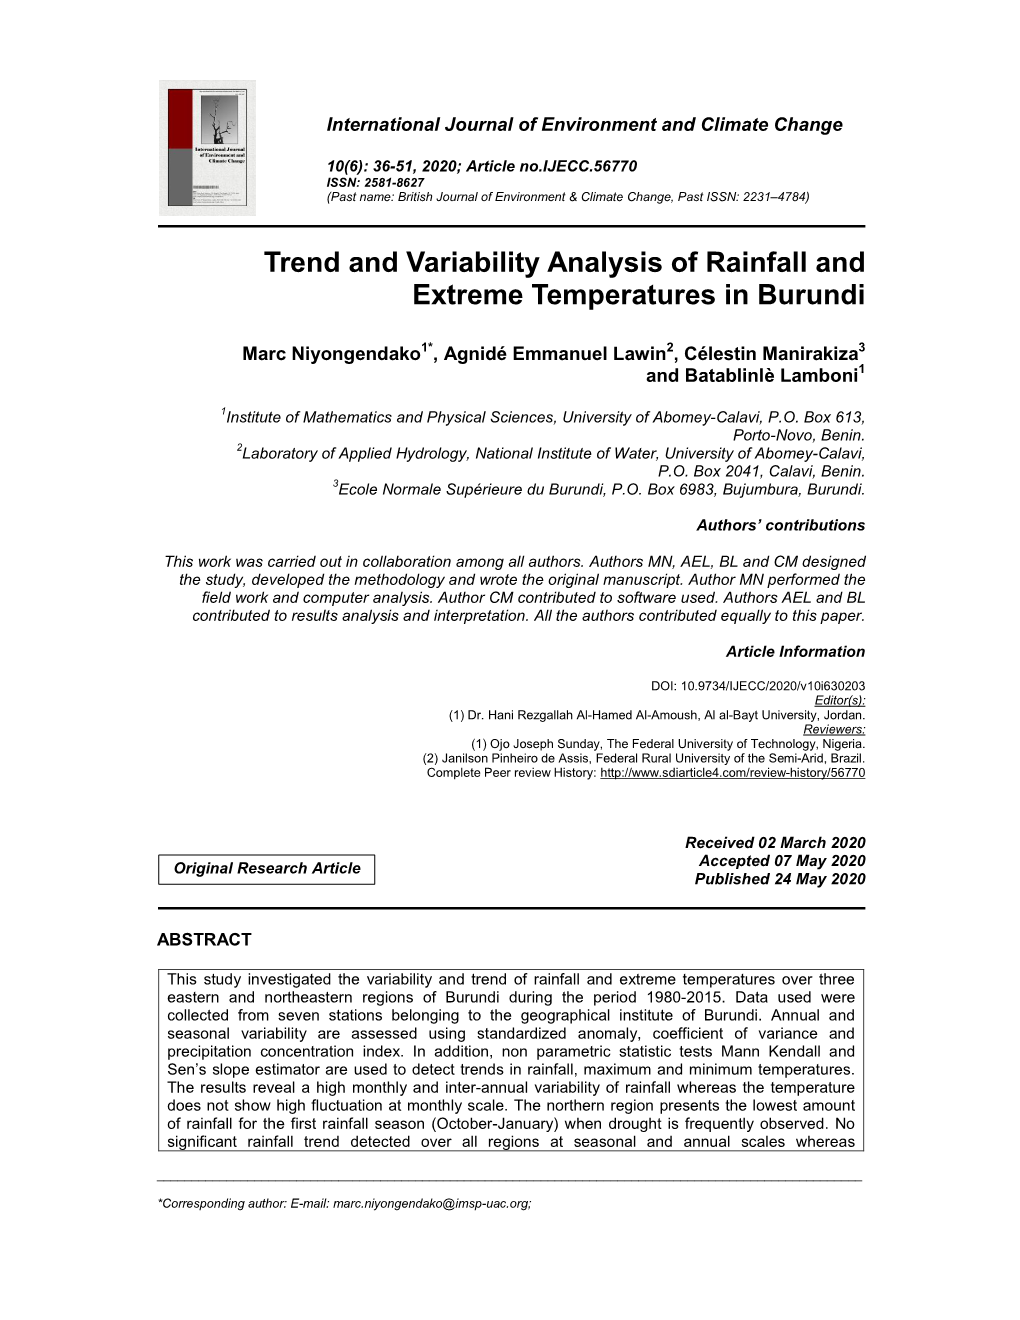 Trend and Variability Analysis of Rainfall and Extreme Temperatures in Burundi